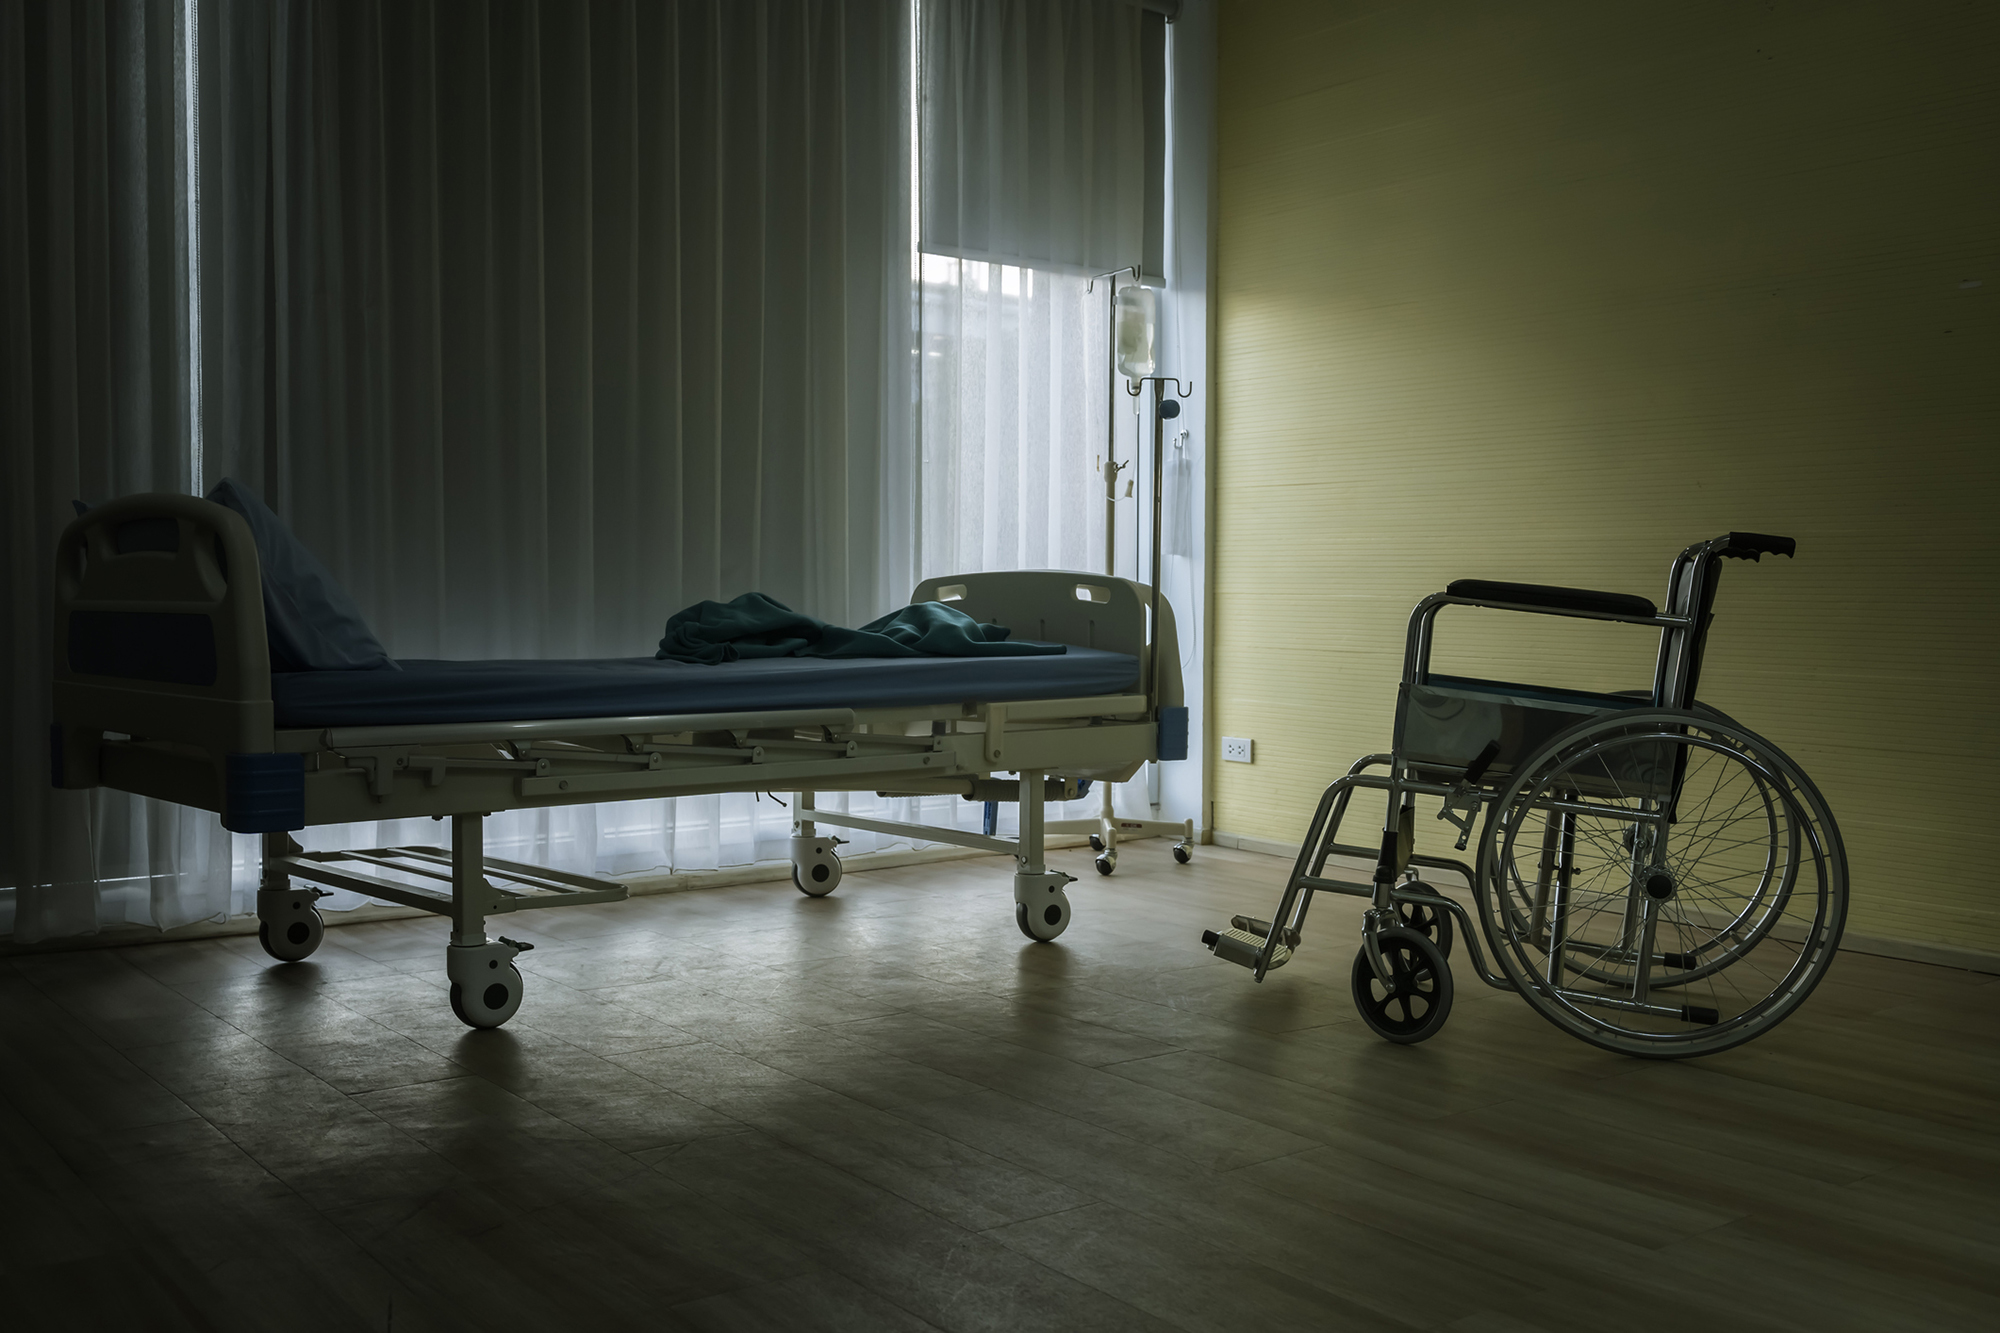 Empty hospital bed and wheelchair in a health care facility with curtains drawn.